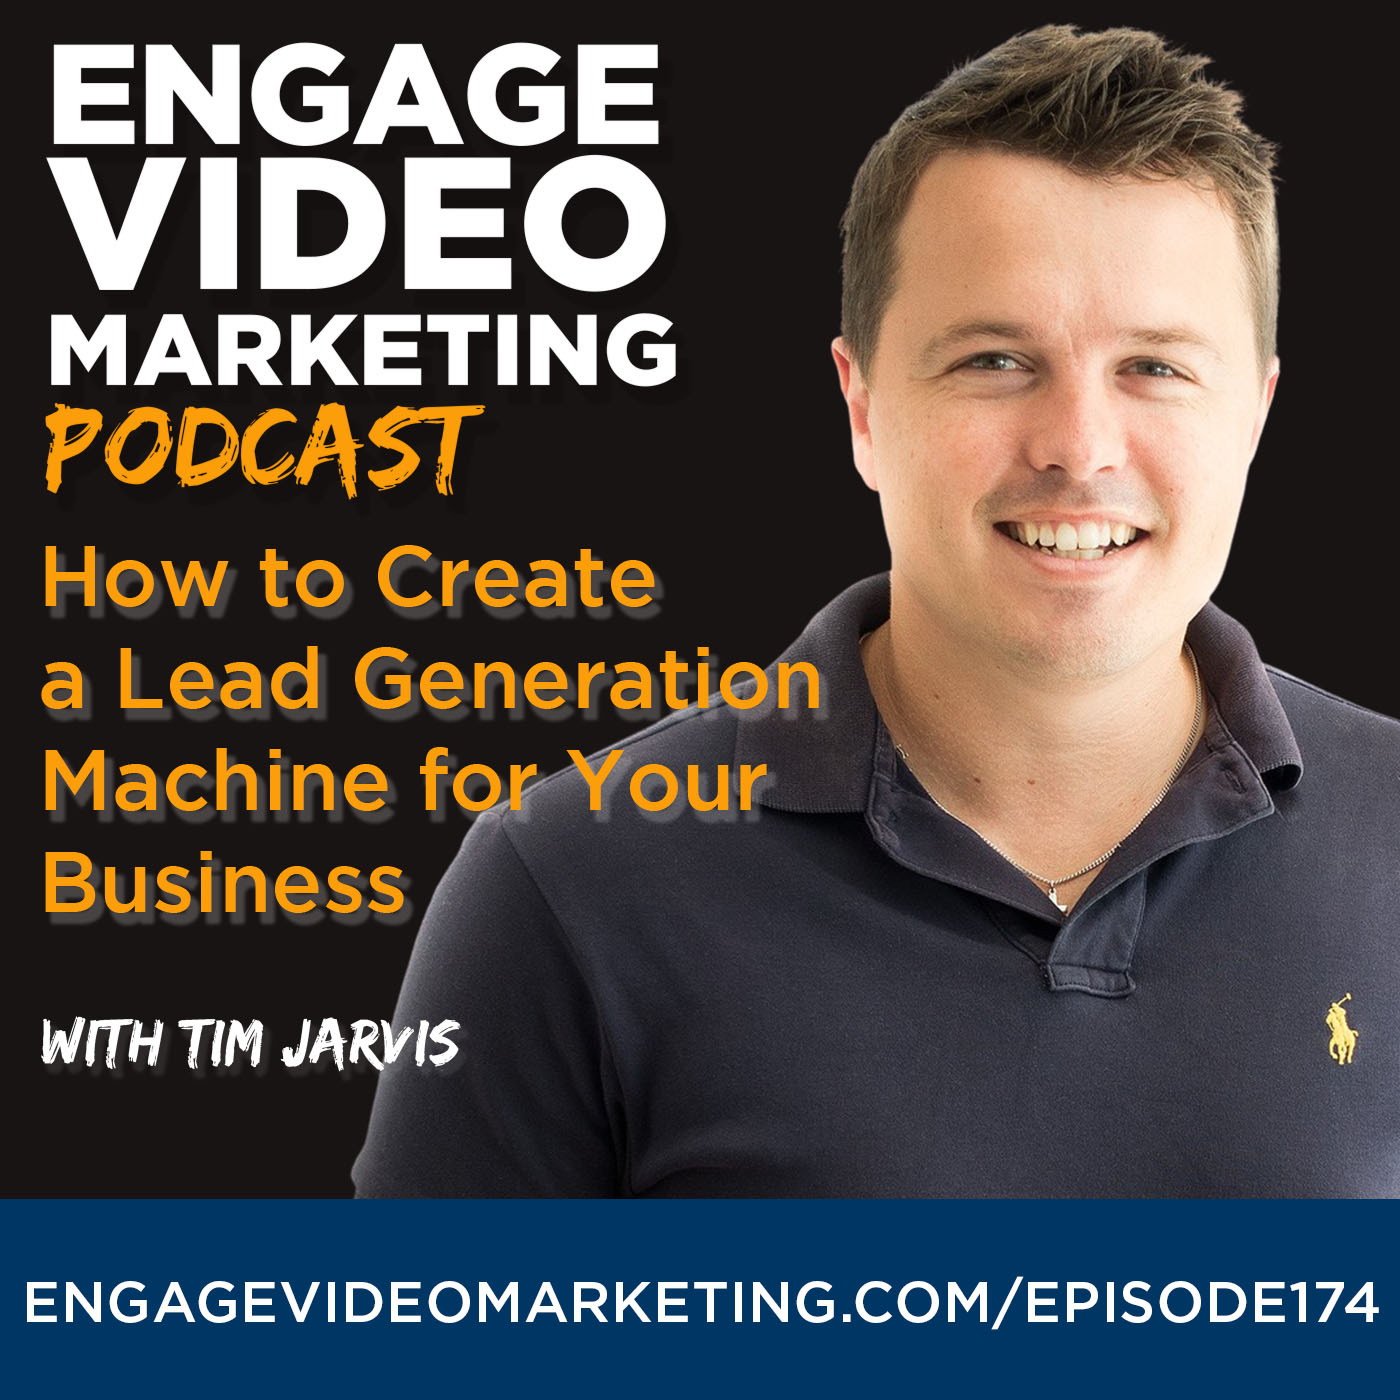 How to Create a Lead Generation Machine for Your Business with Tim Jarvis